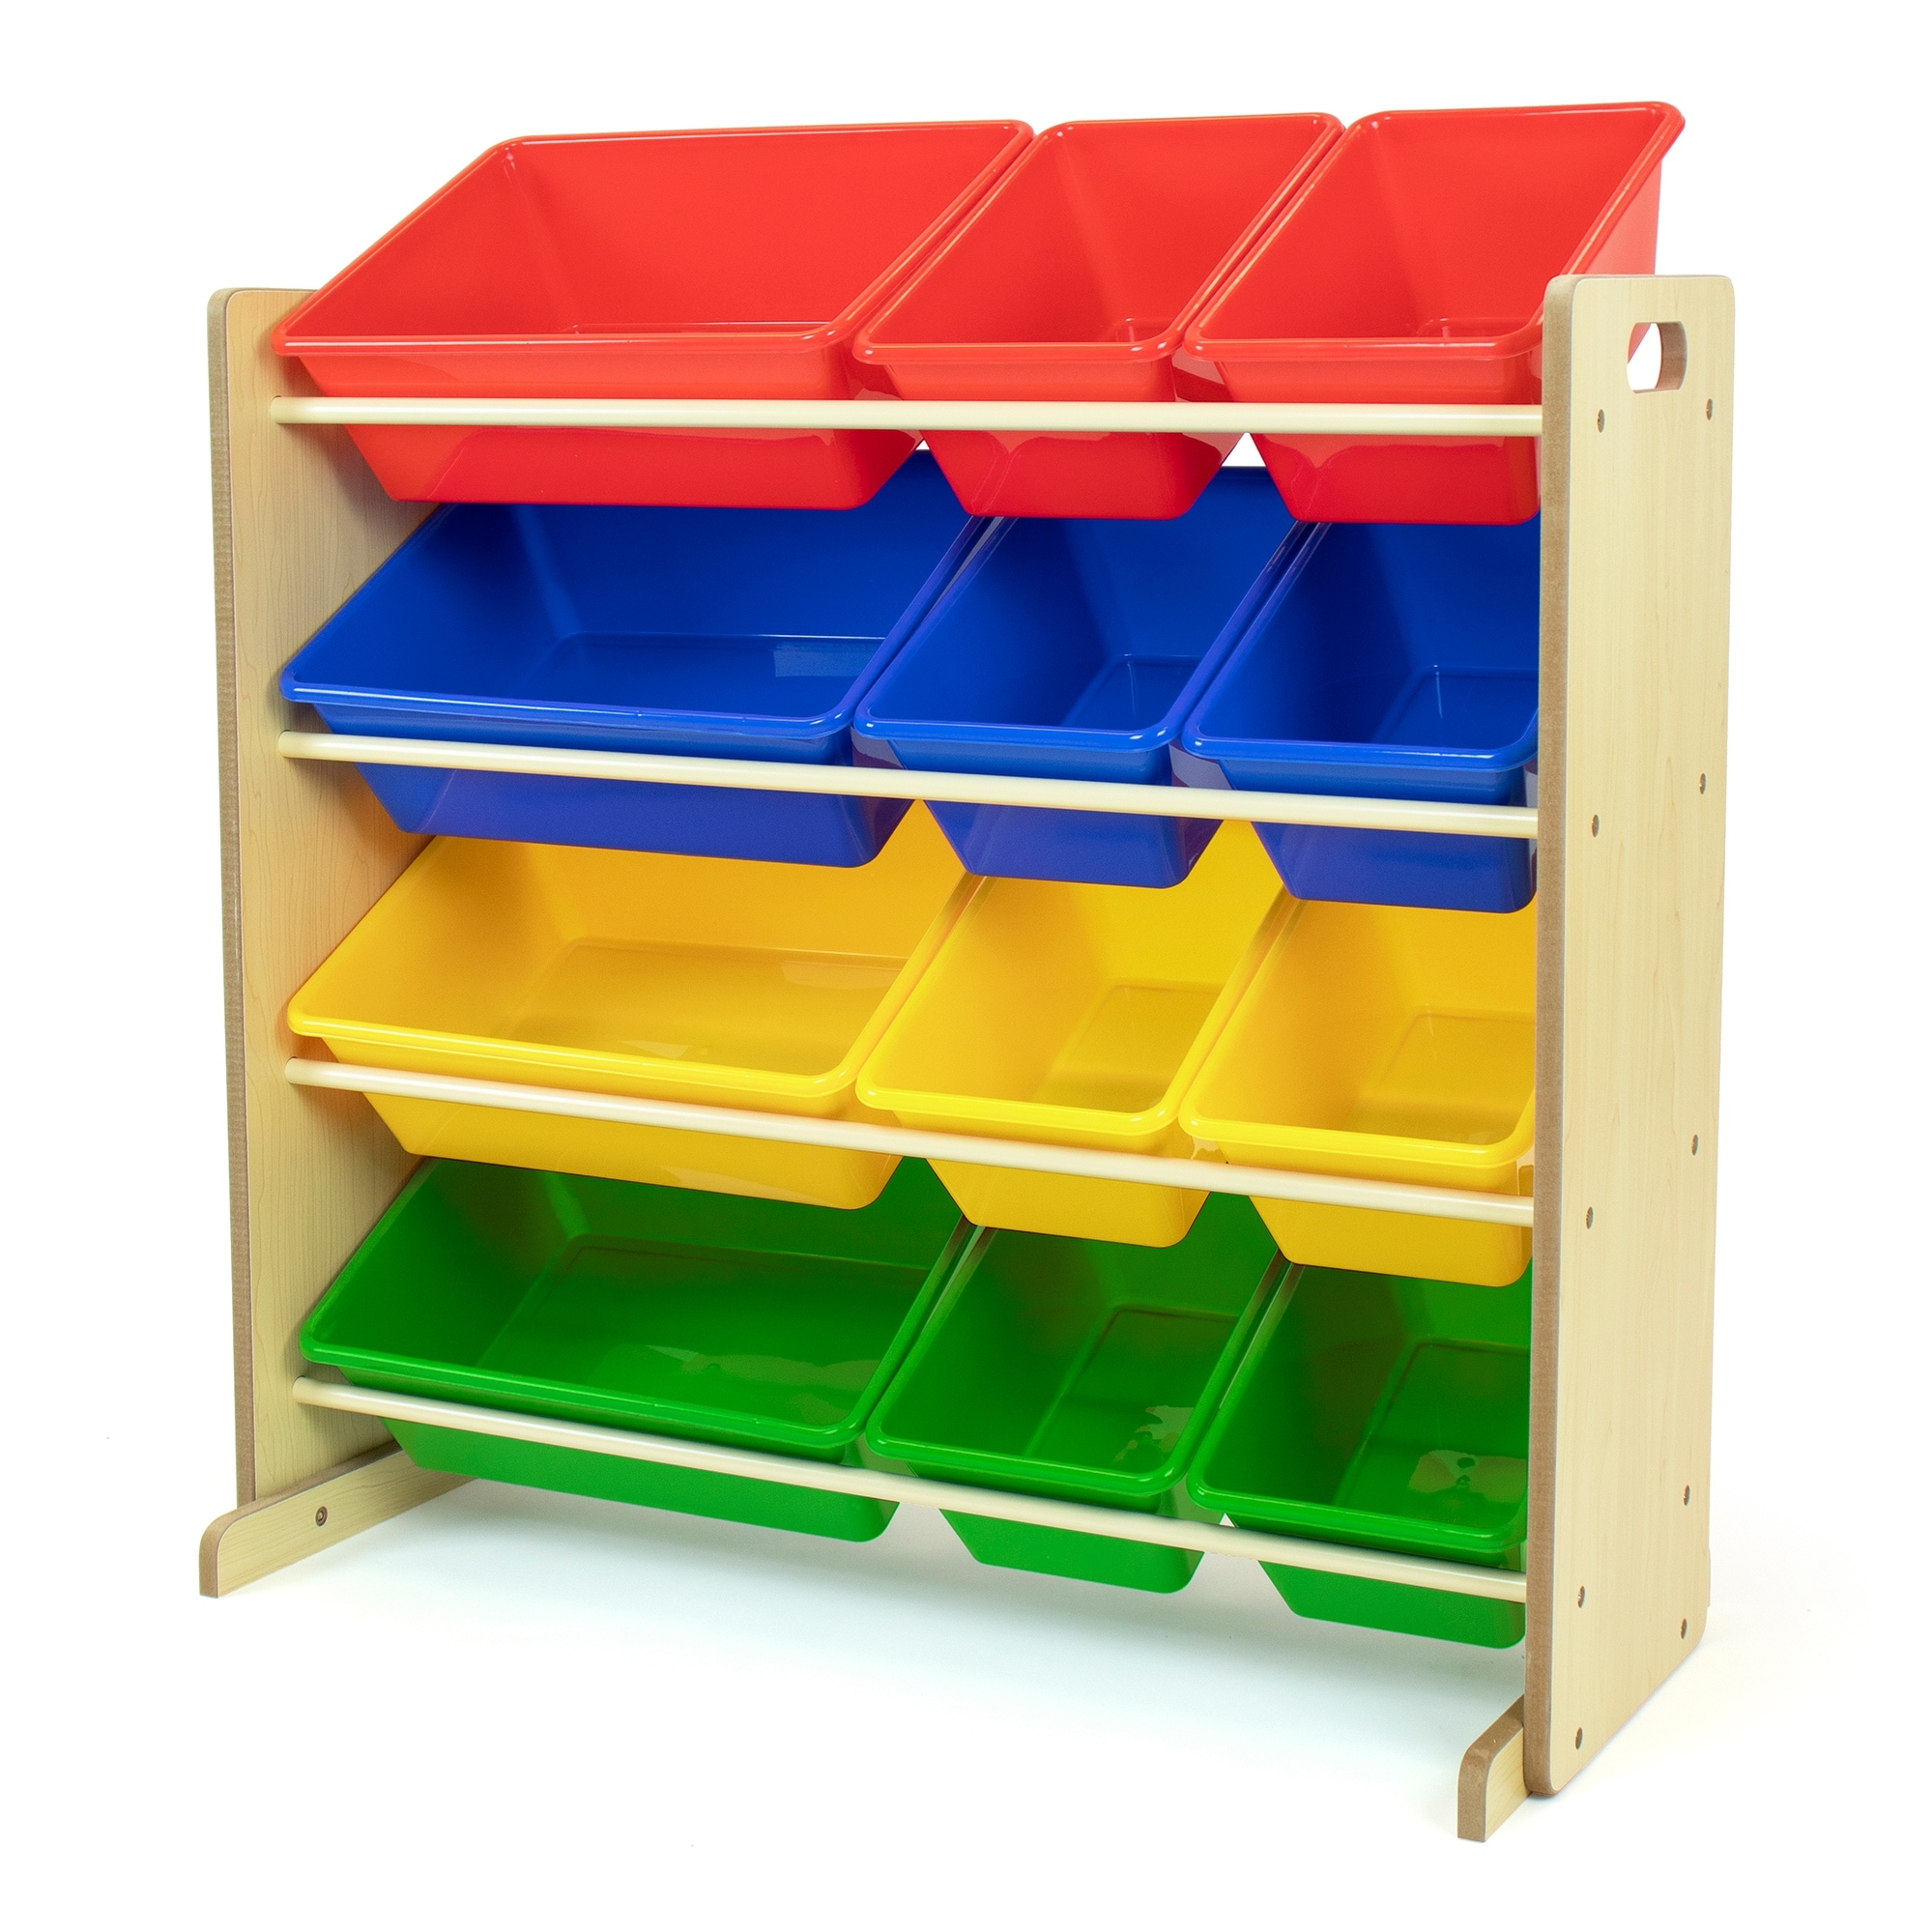 https://ak1.ostkcdn.com/images/products/is/images/direct/21861fe498f9b3ed159ca75df768e3fa61accf52/Tot-Tutors-Kids-Toy-Storage-Organizer-with-12-Plastic-Bins%2C-Natural-Frame-%26-Primary-Bins.jpg